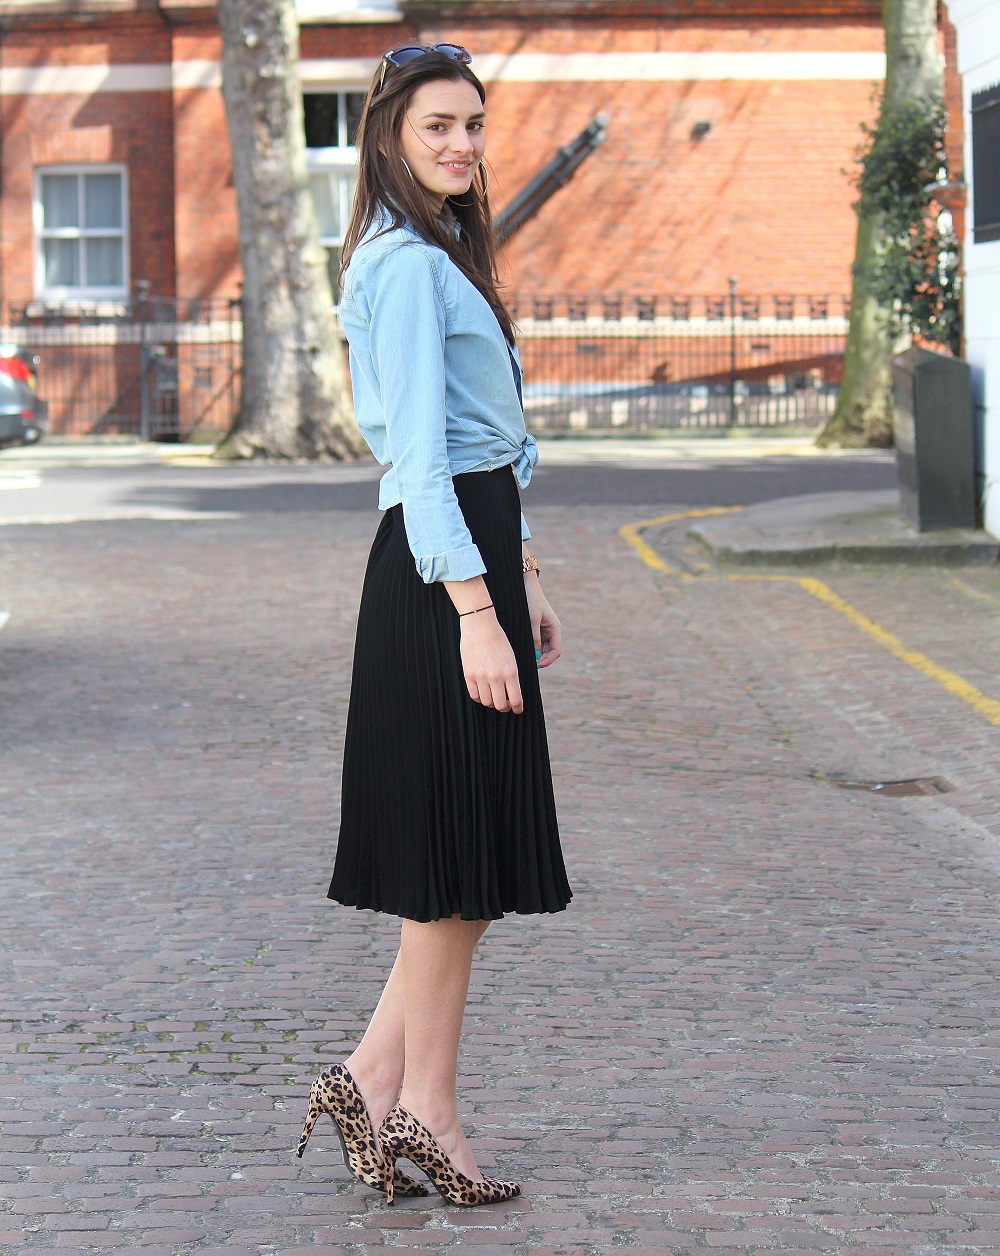 peexo fashion blogger wearing pleated midi skirt with lace bralet and denim shirt and leopard print heels and sunglasses in spring